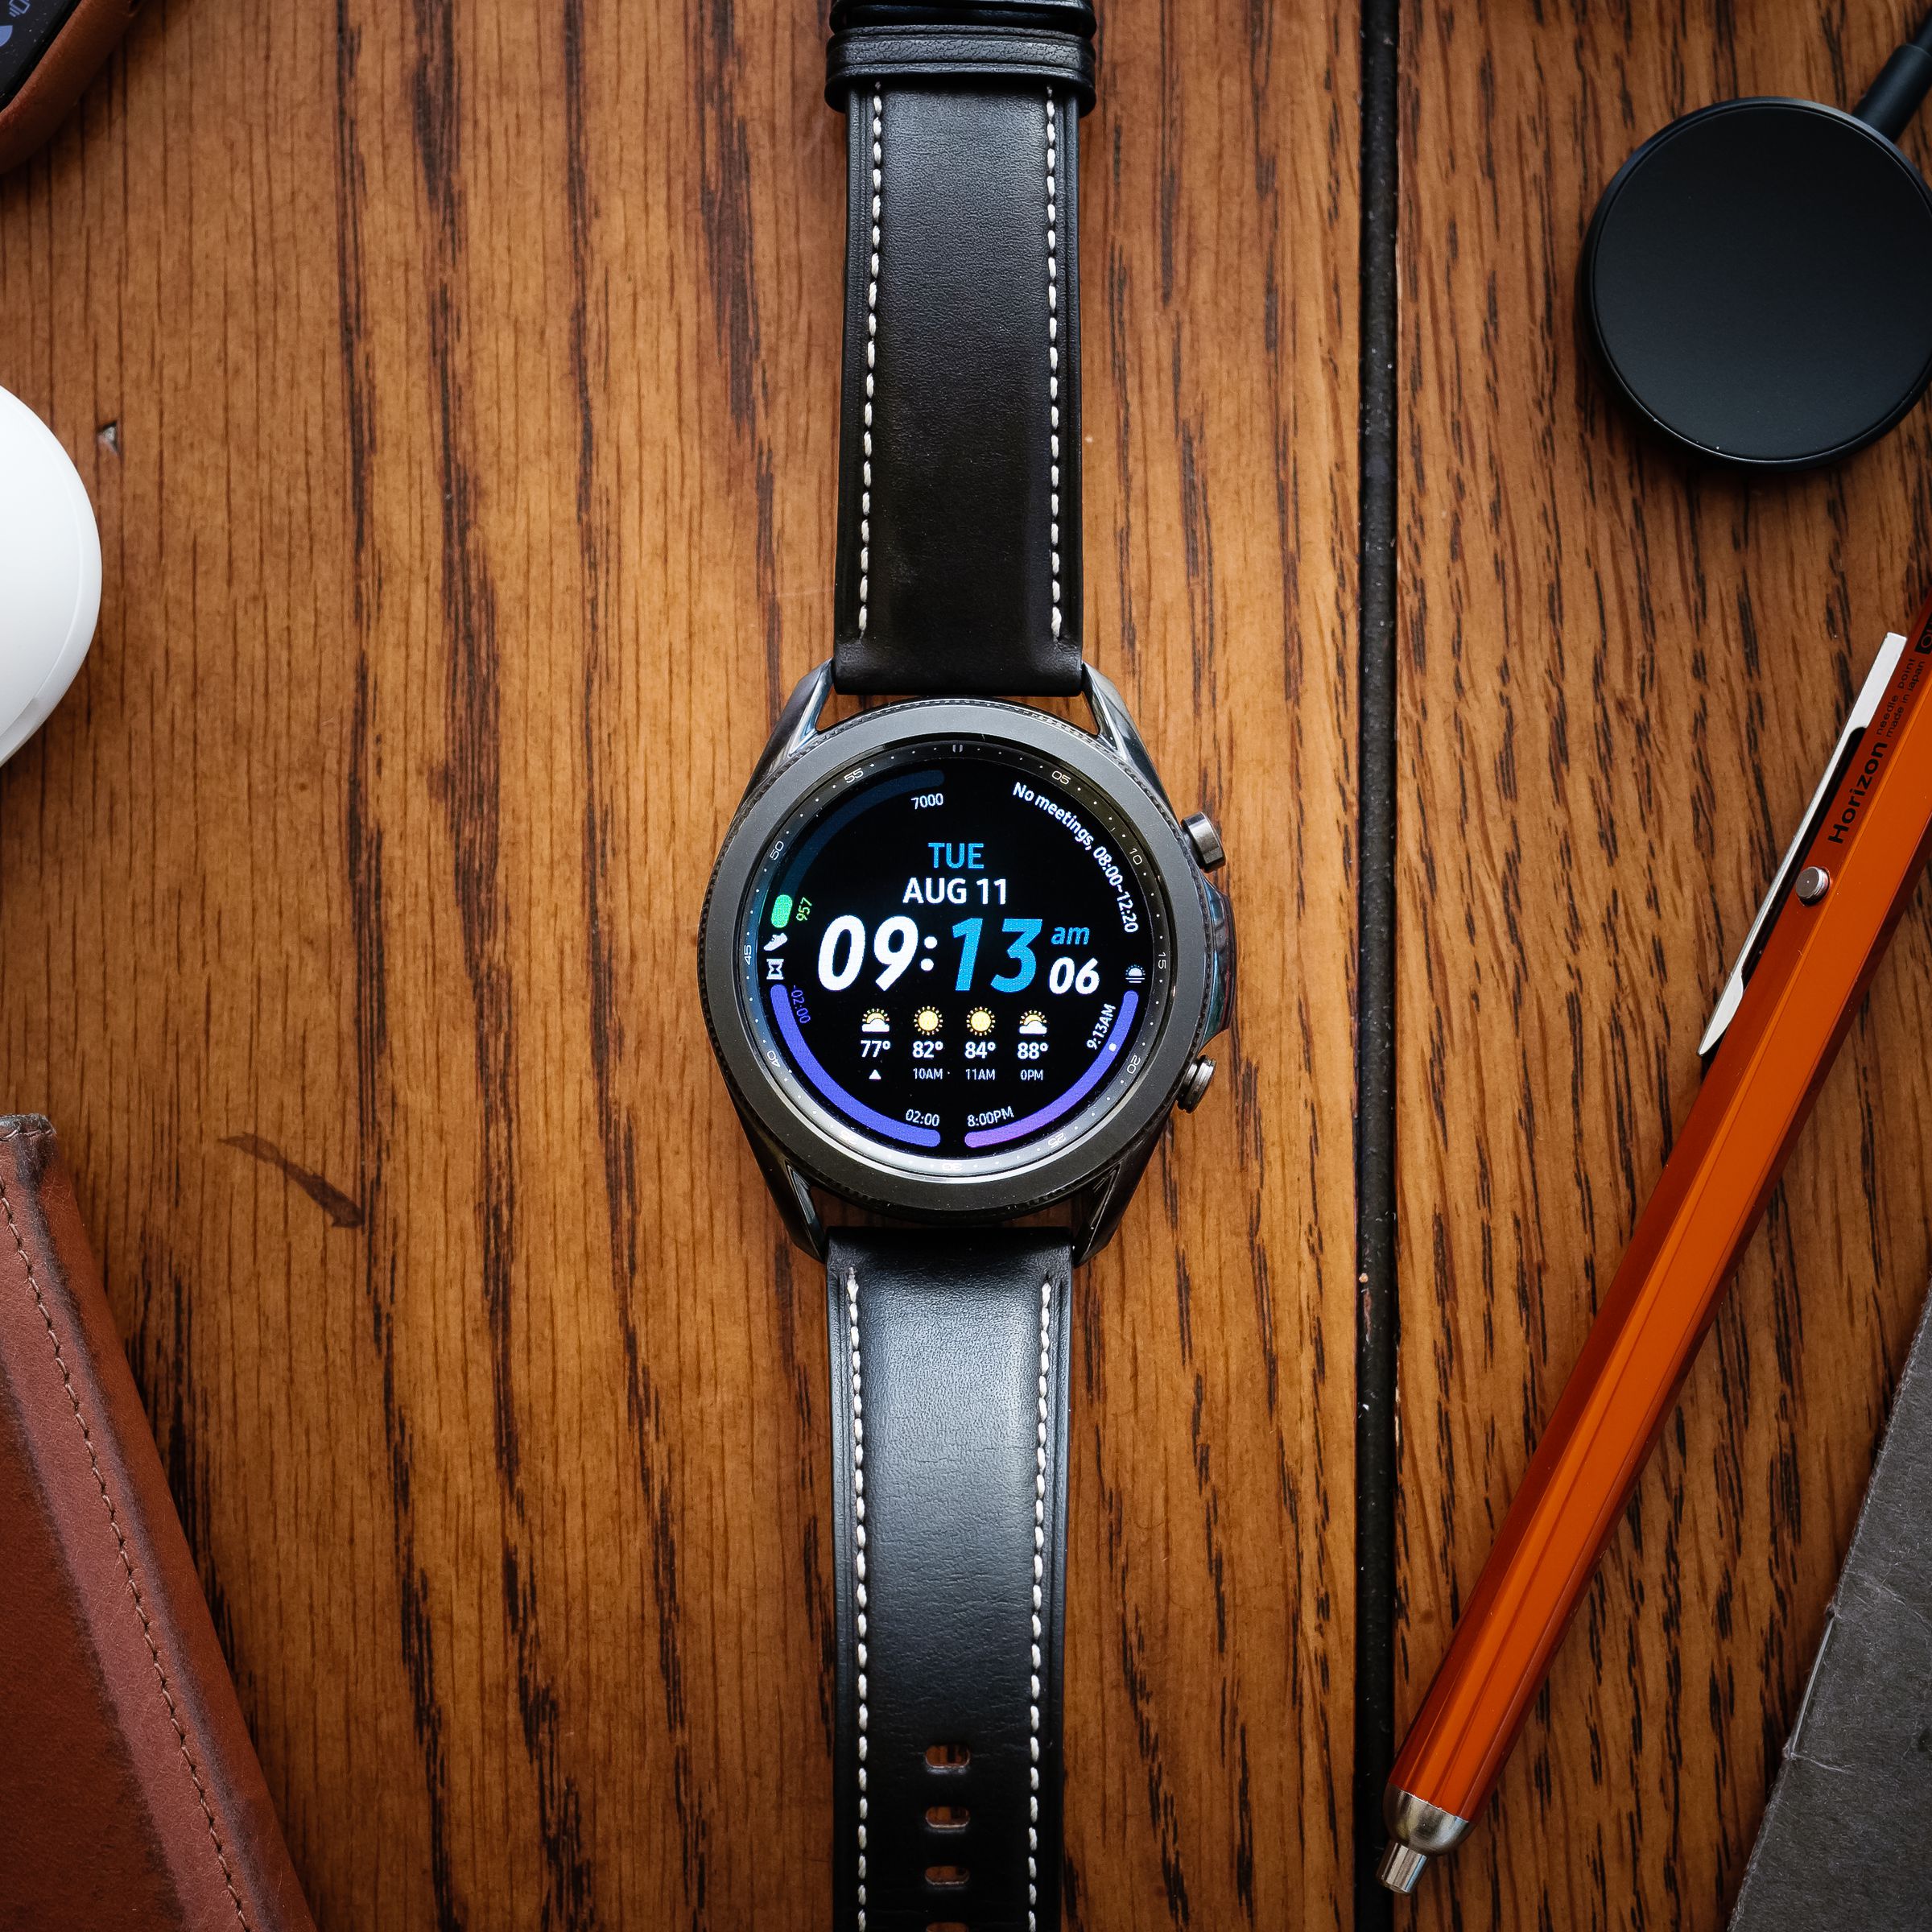 Samsung Galaxy Watch 3 review: small changes to a known formula